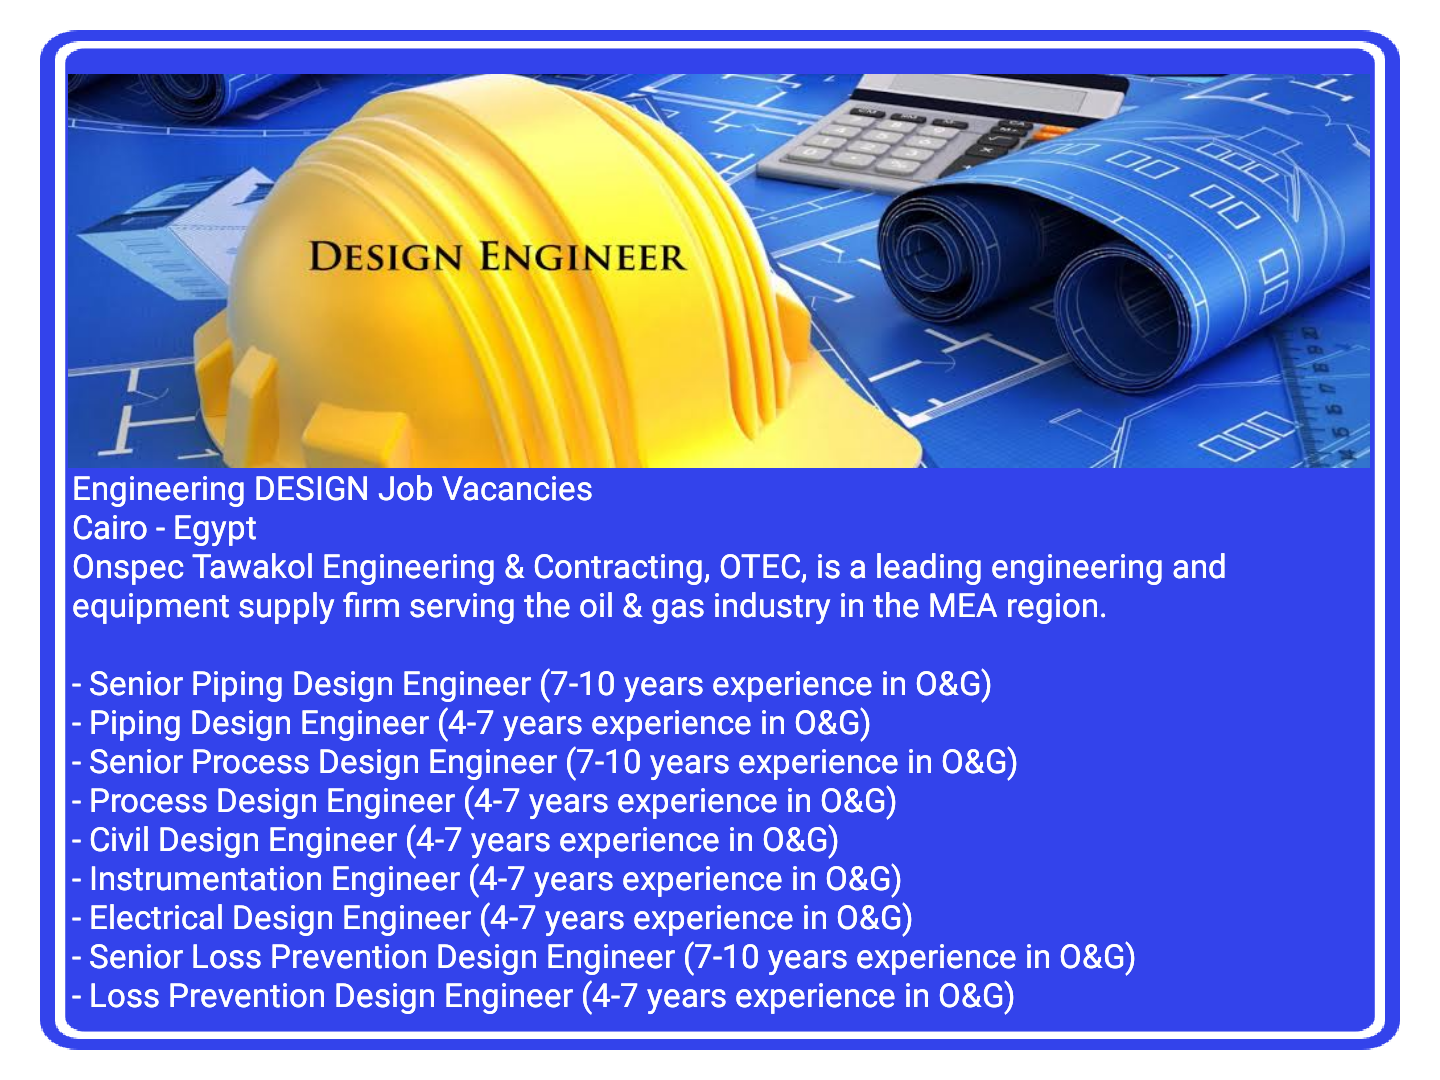 Piping, Process, Instrument, Electric & Civil Design Engineer Jobs